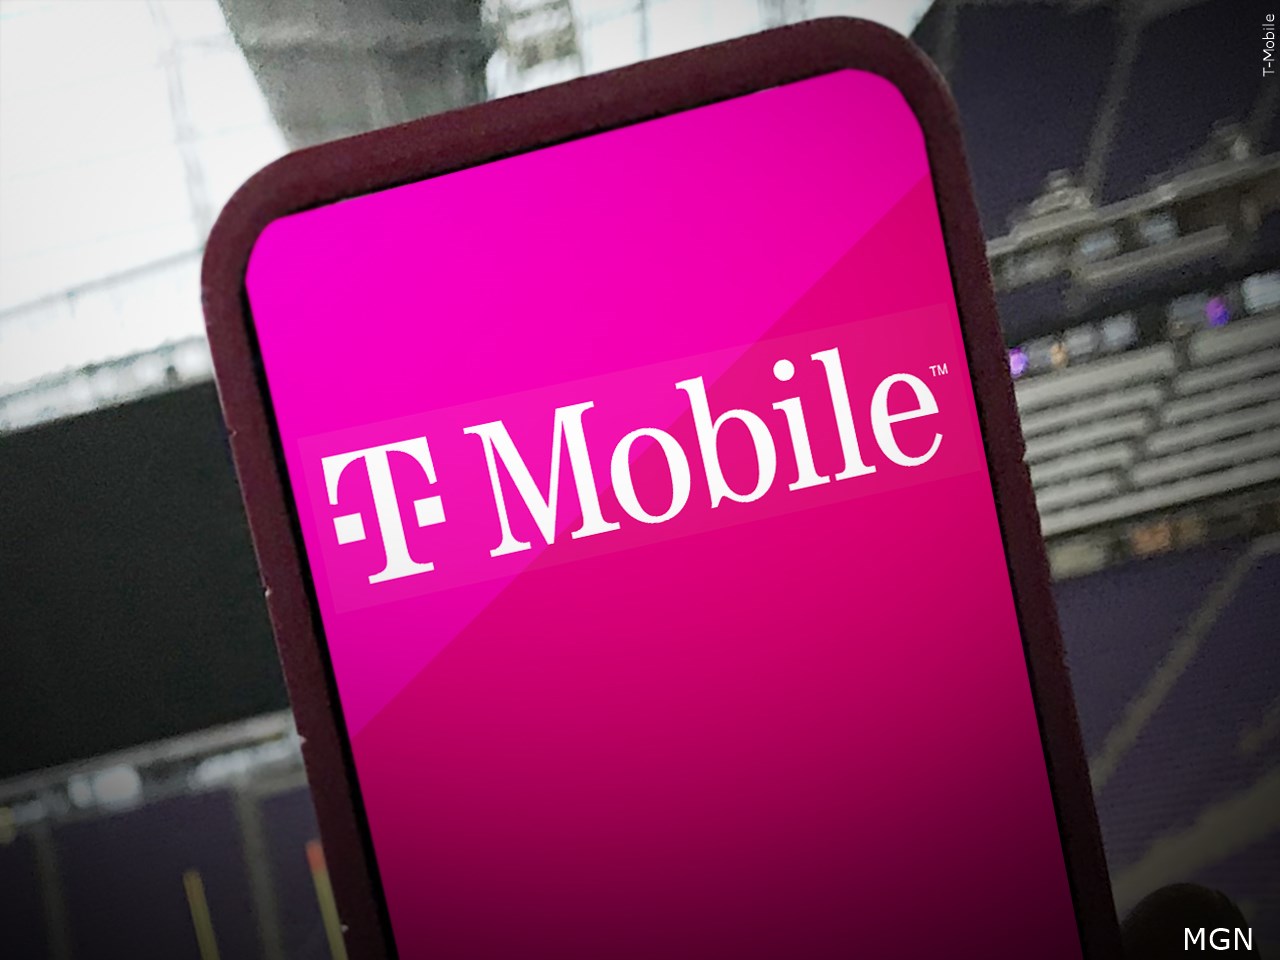 T-Mobile confirms data breach, says it's investigating scope